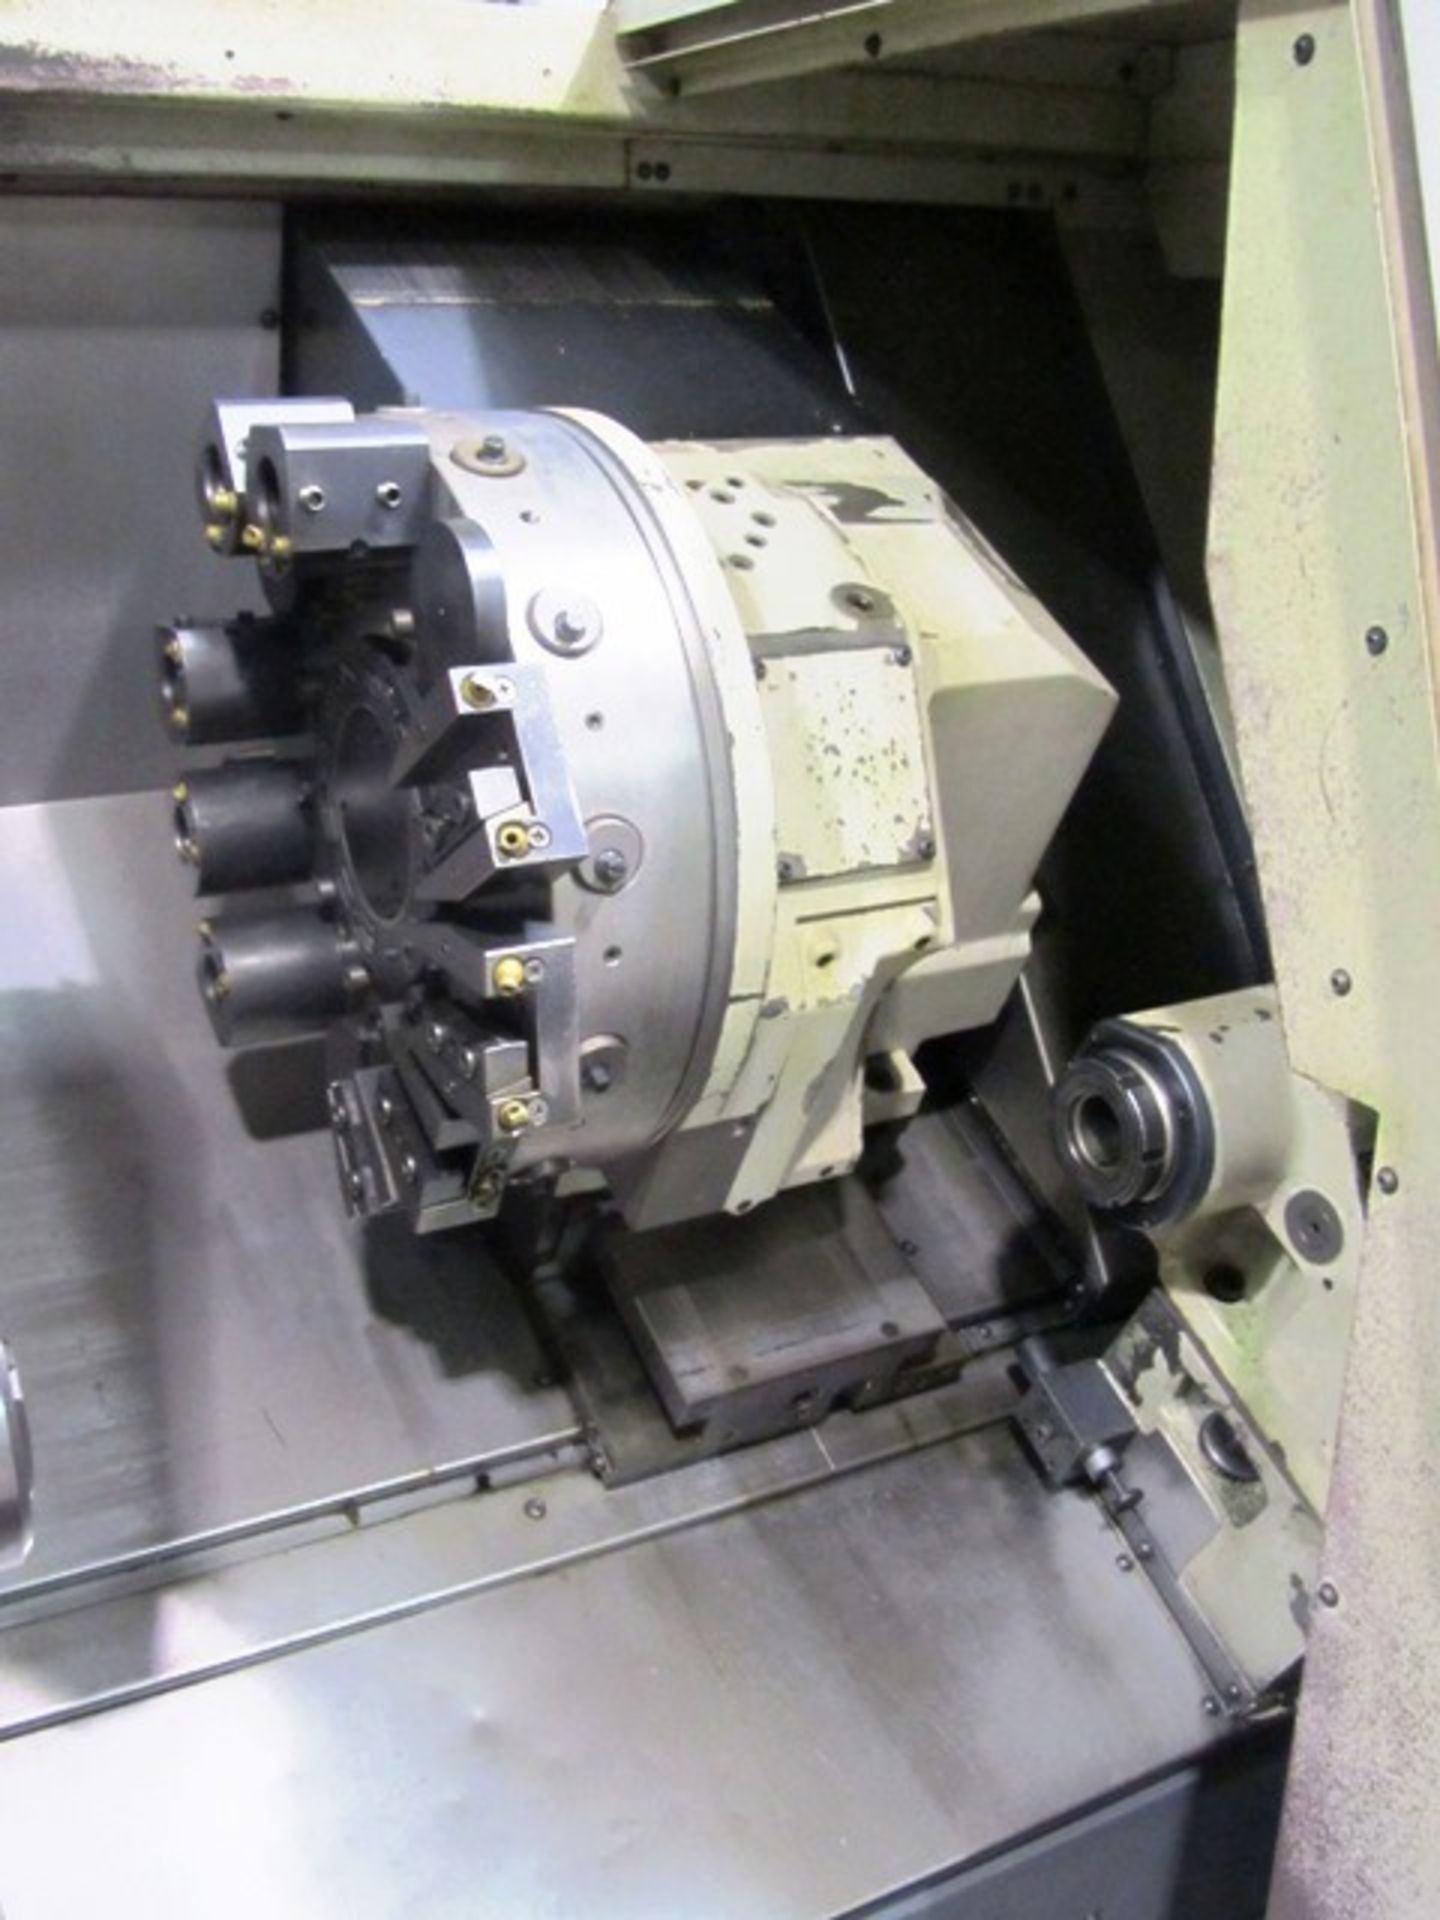 Okuma Model Captain L370M CNC Turning Center with Milling, `C' Axis, 12 Station Turret, Collet - Image 3 of 7